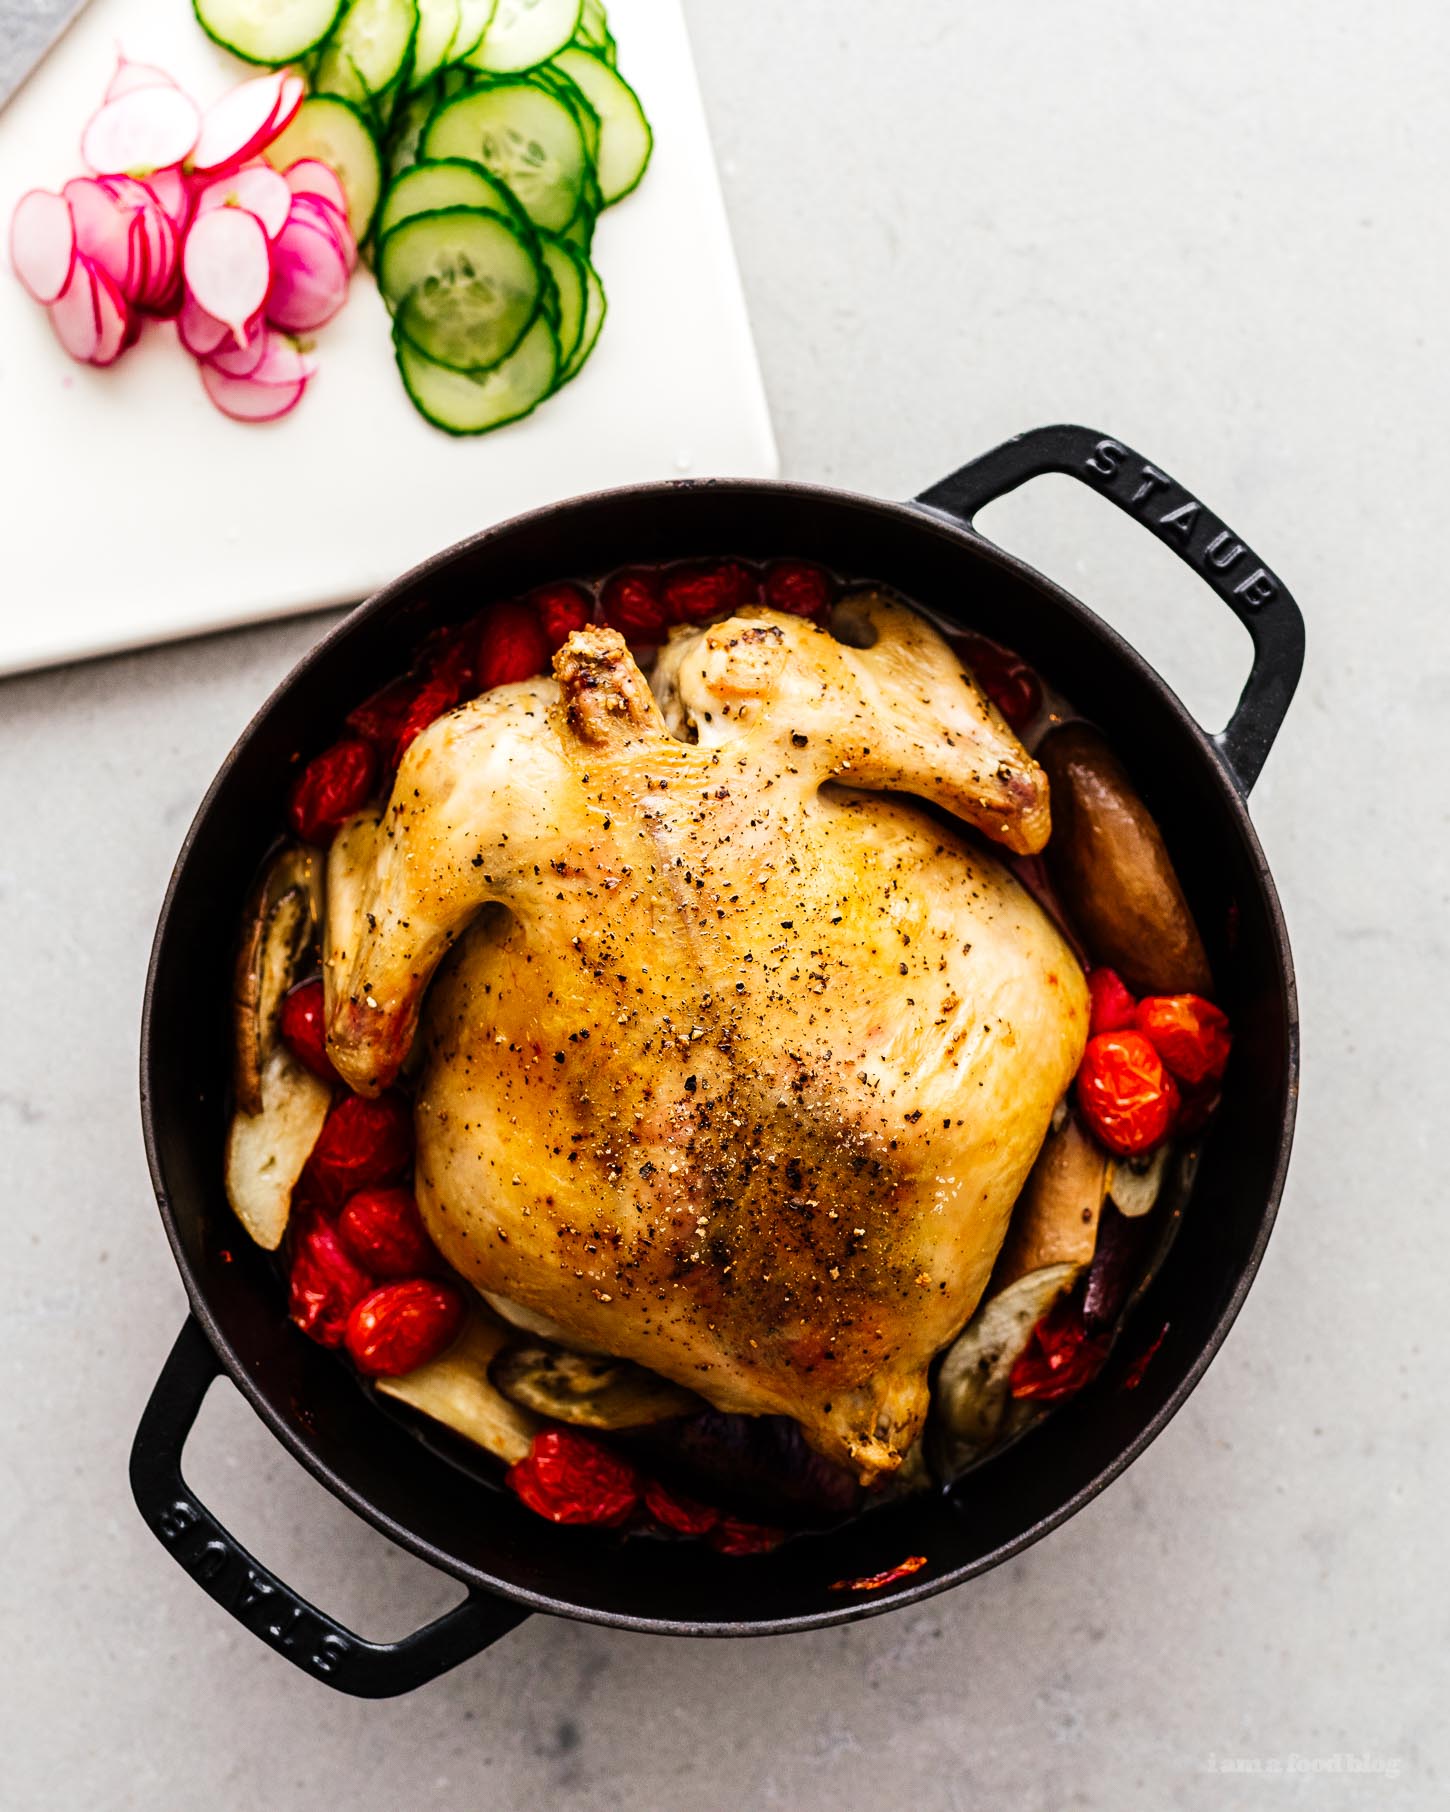 Easy Roast Chicken with Eggplant and Tomatoes | www.iamafoodblog.com